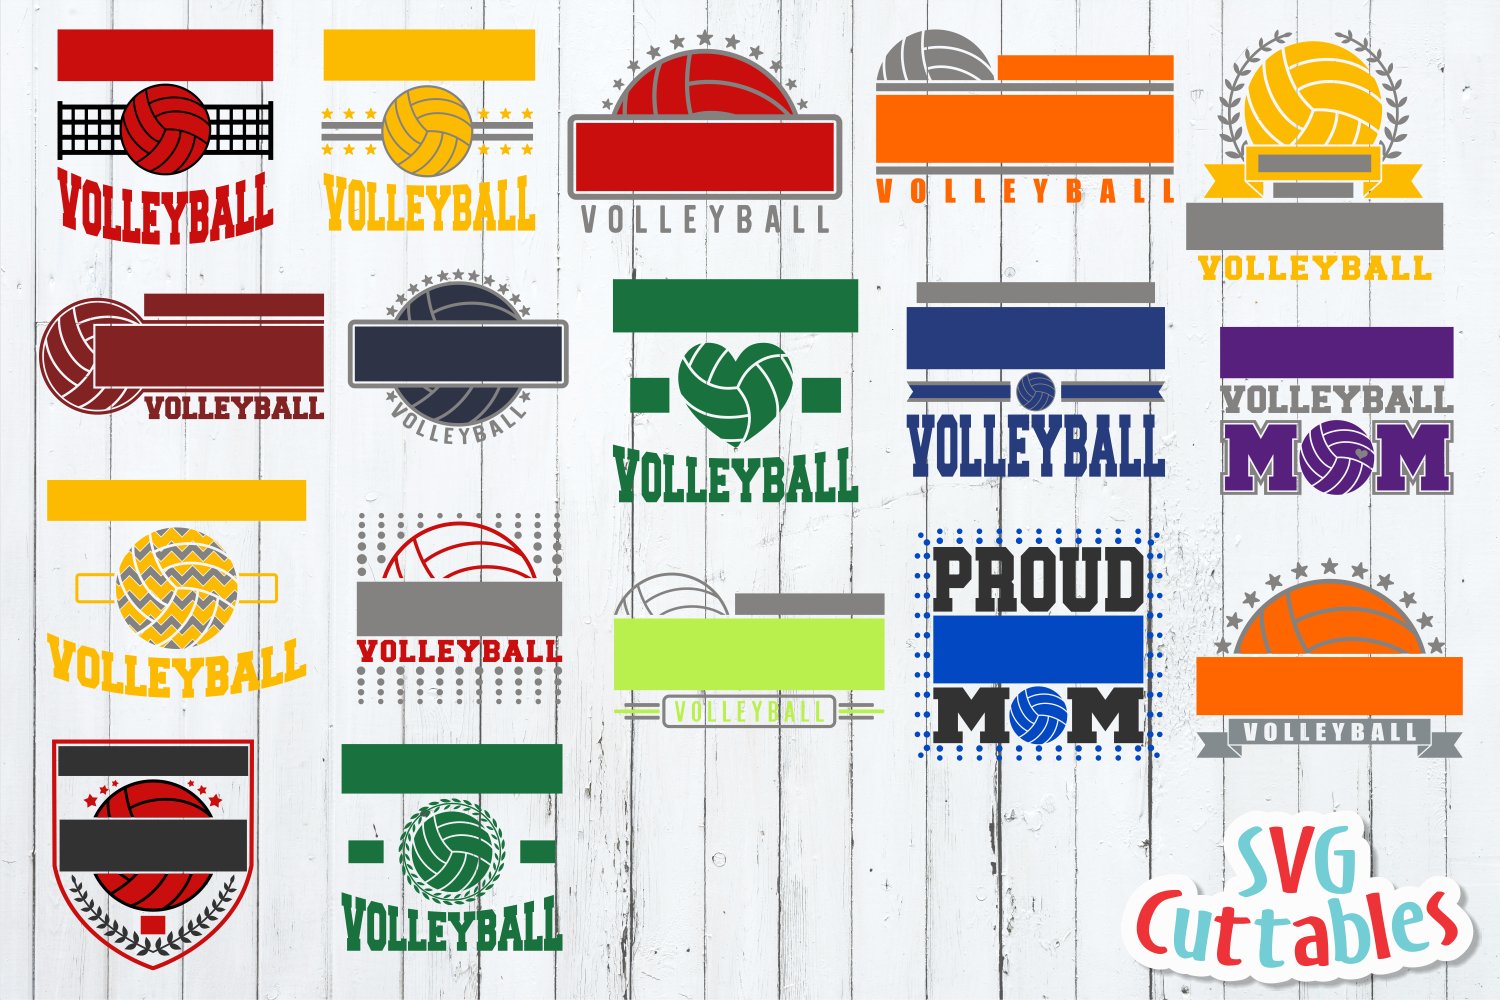 Diverse of volleyball prints.